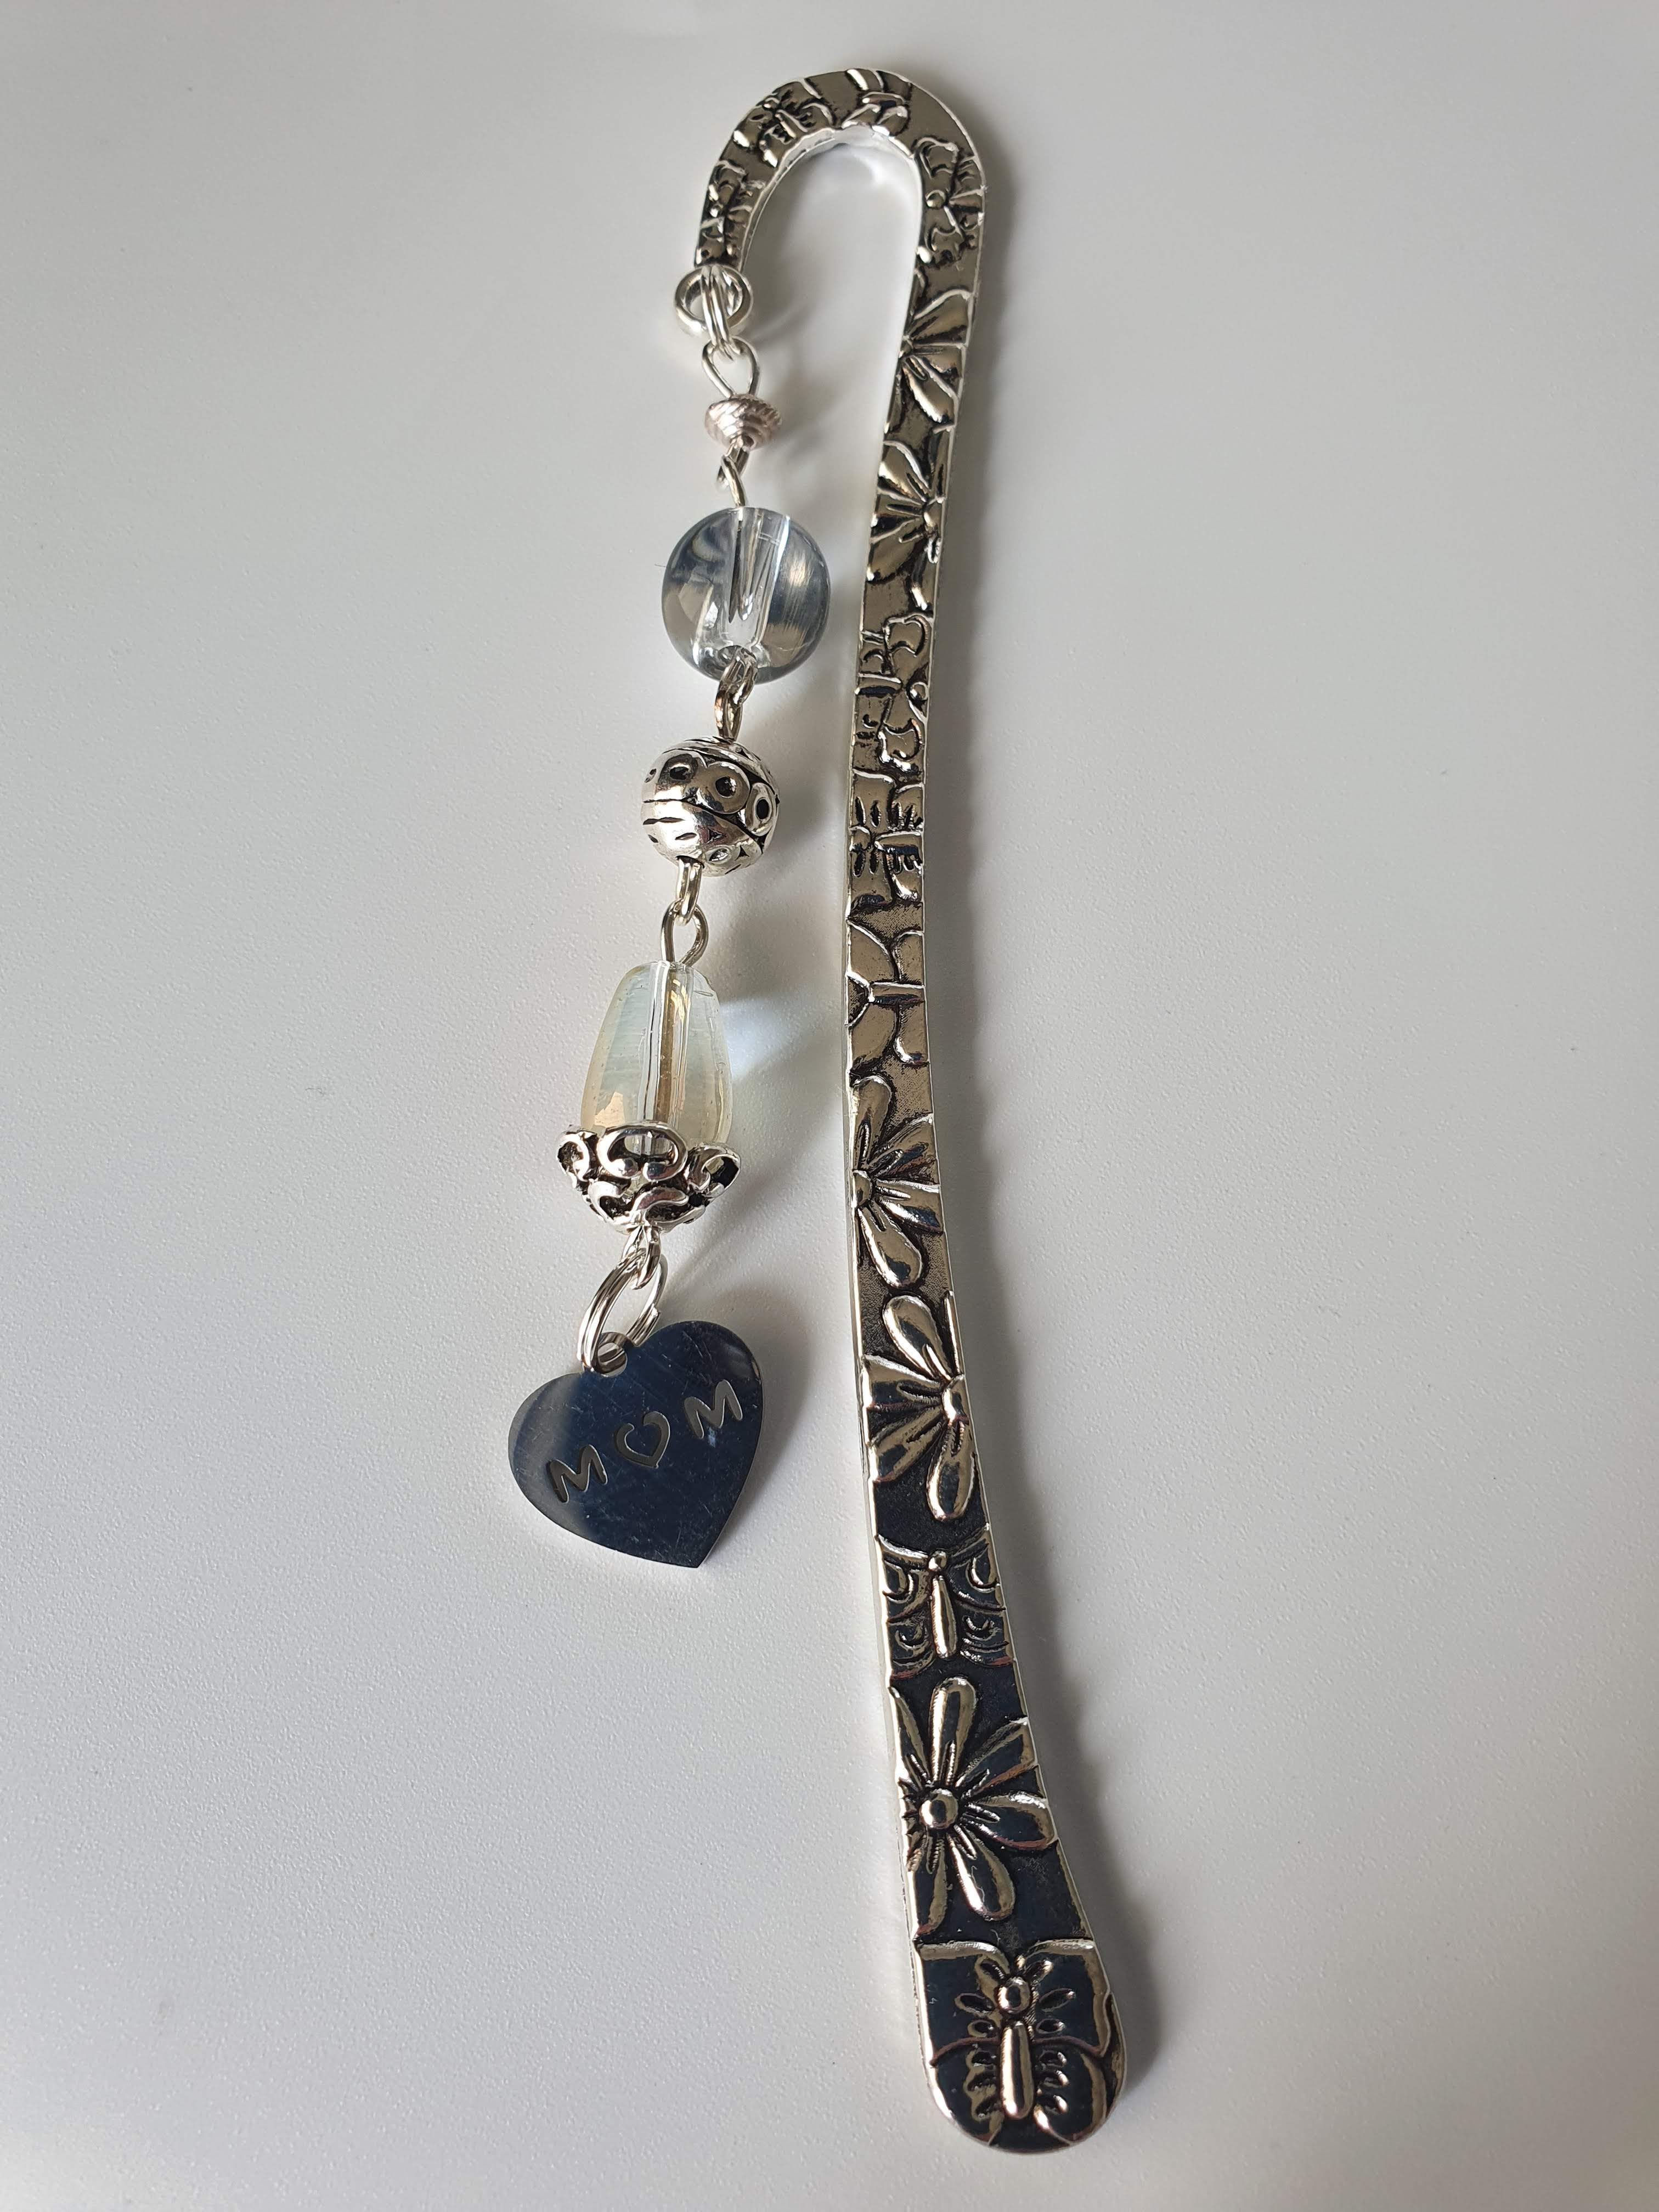 This is a picture of a silver bookmark with a 'mom' charm 